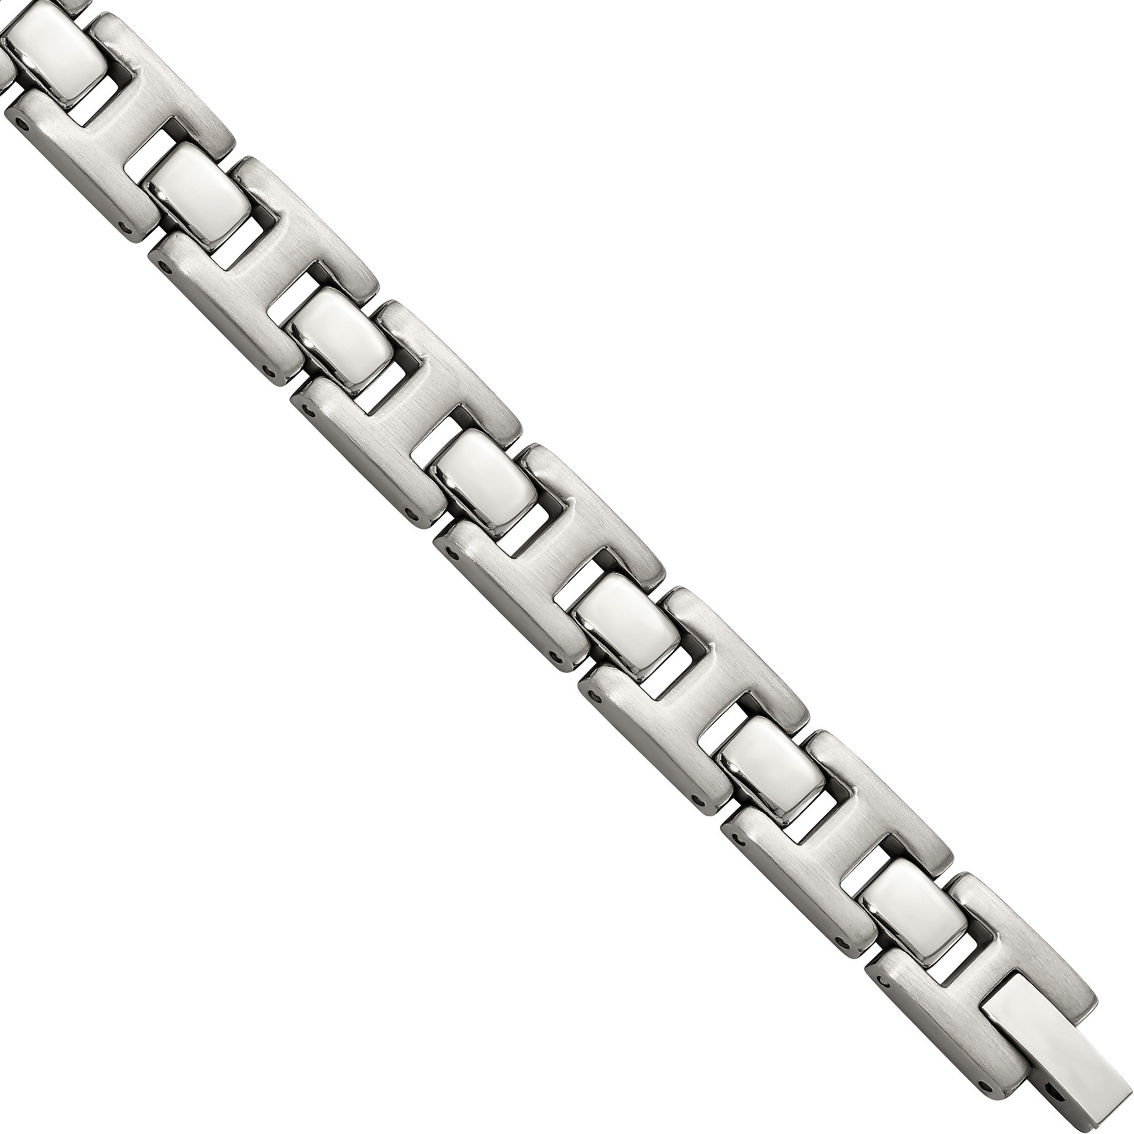 Chisel Stainless Steel Brushed and Polished Bracelet 8.5 in. - Image 3 of 4